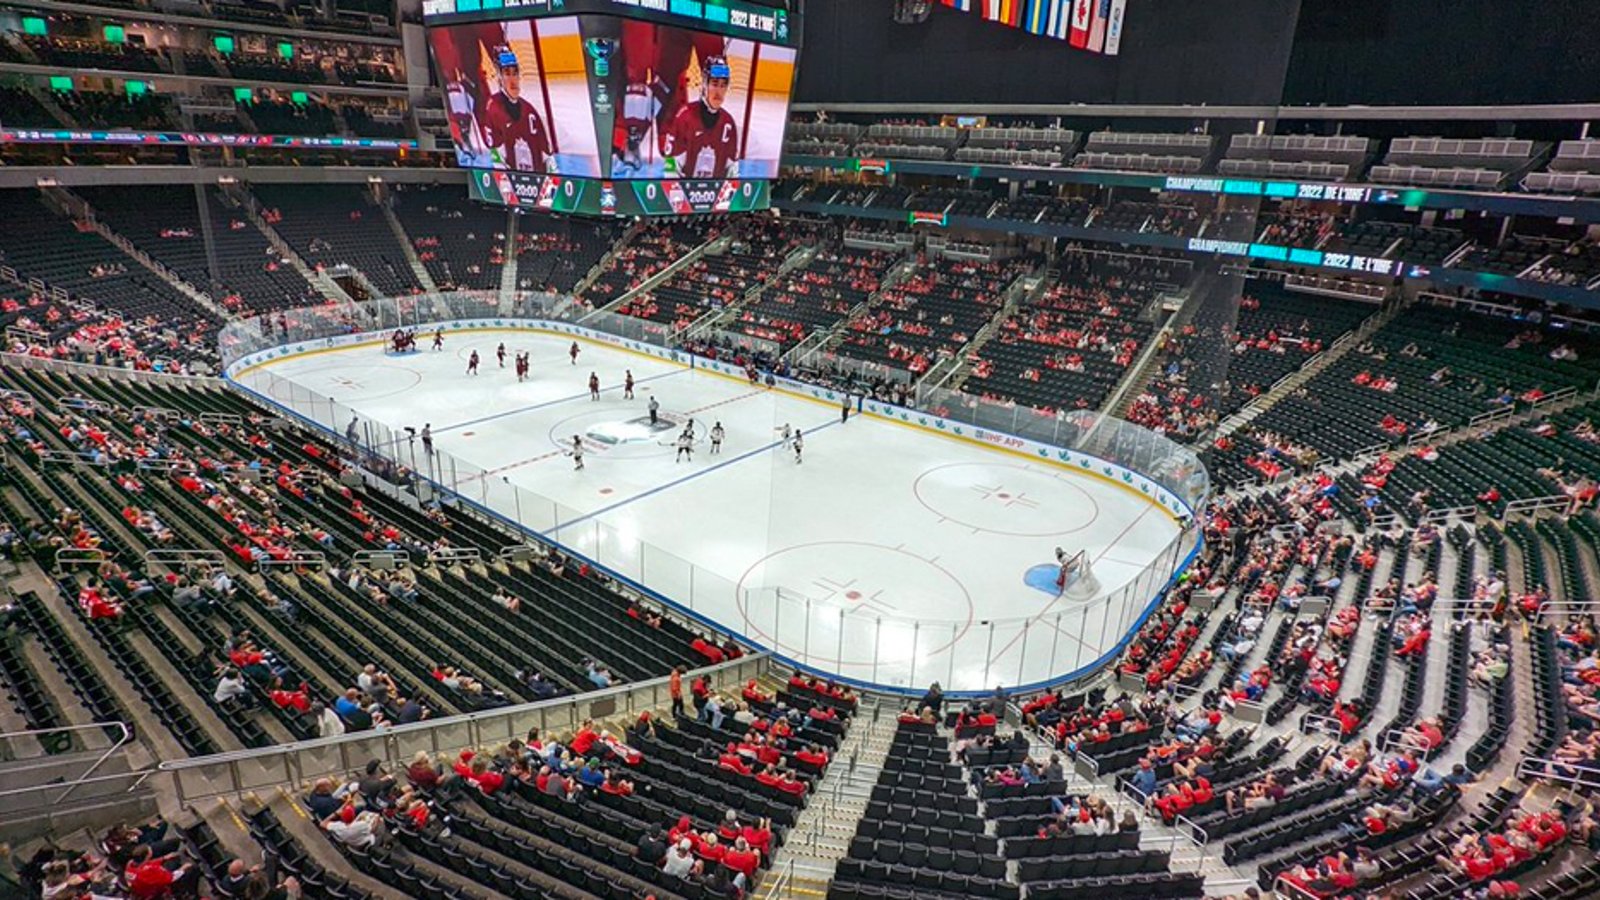 Embarrassing crowds at the World Juniors in Edmonton... even for Canada's games